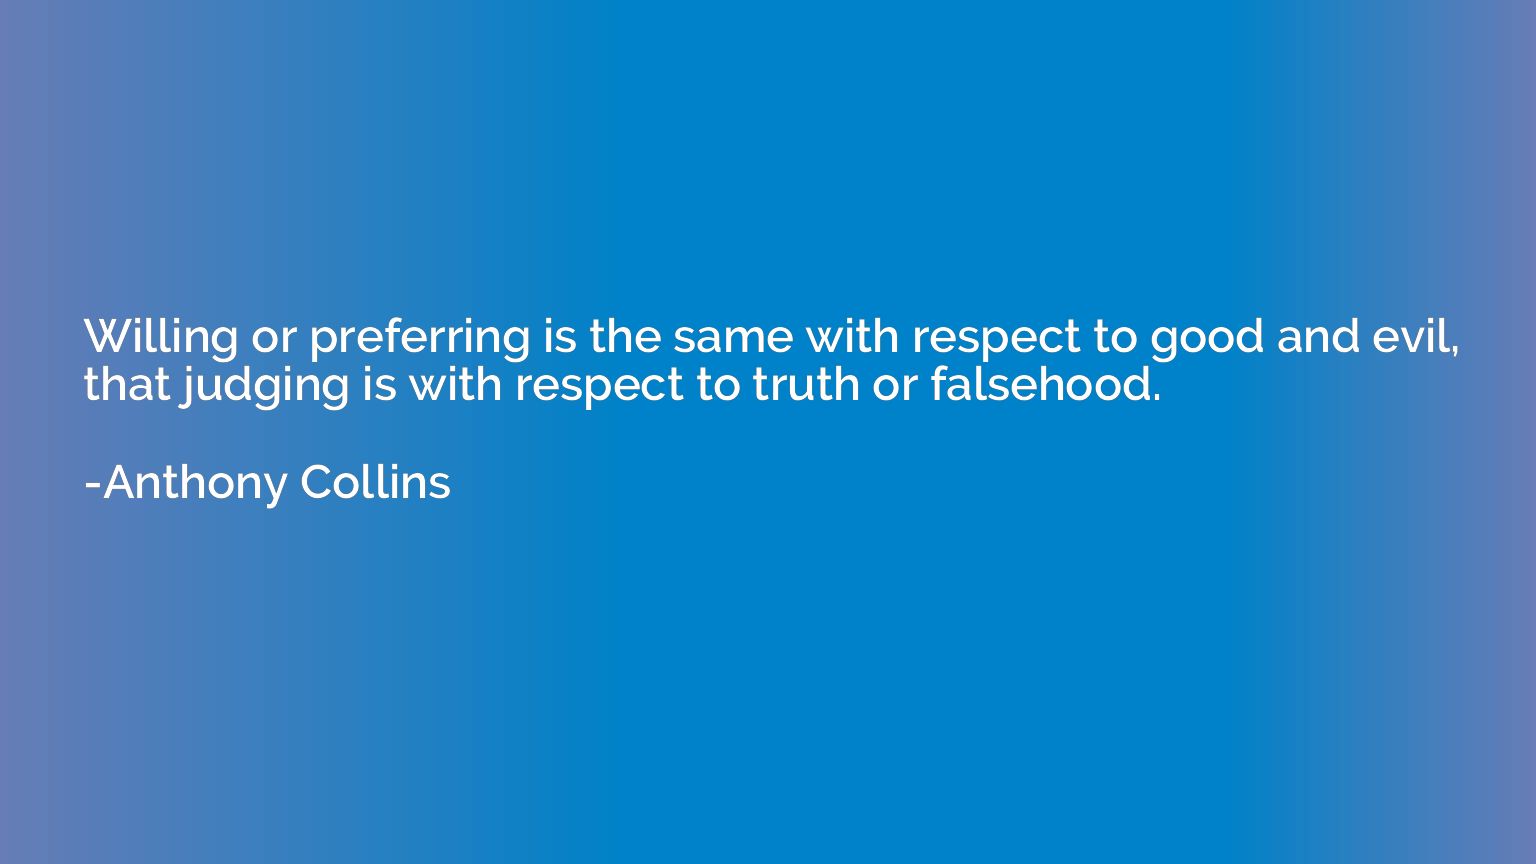 Willing or preferring is the same with respect to good and e